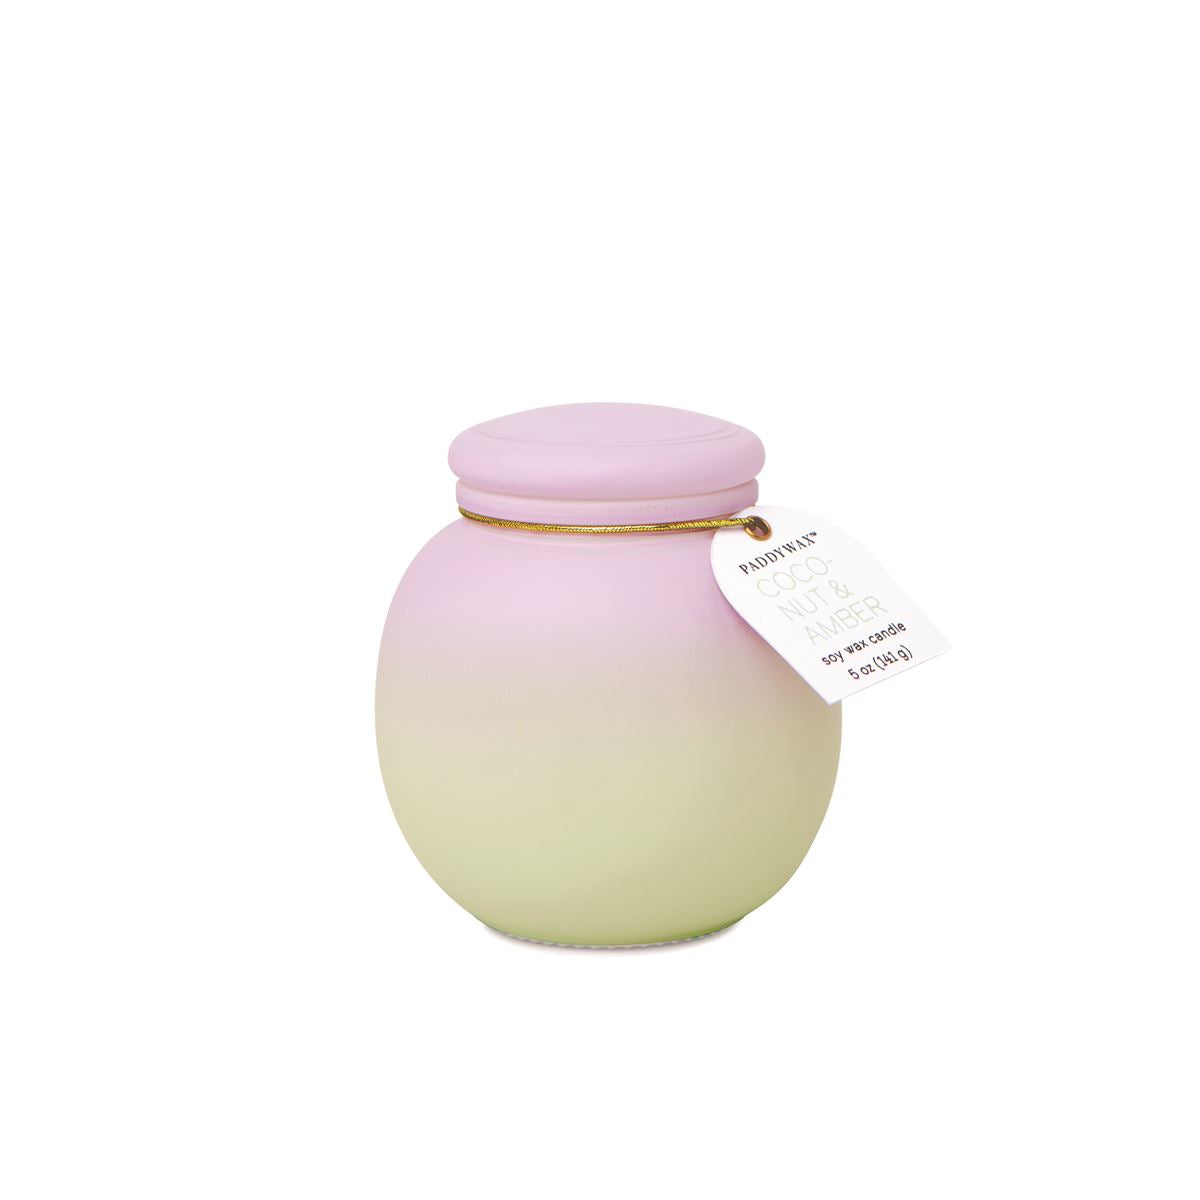 Orb Candle: Amber Coconut